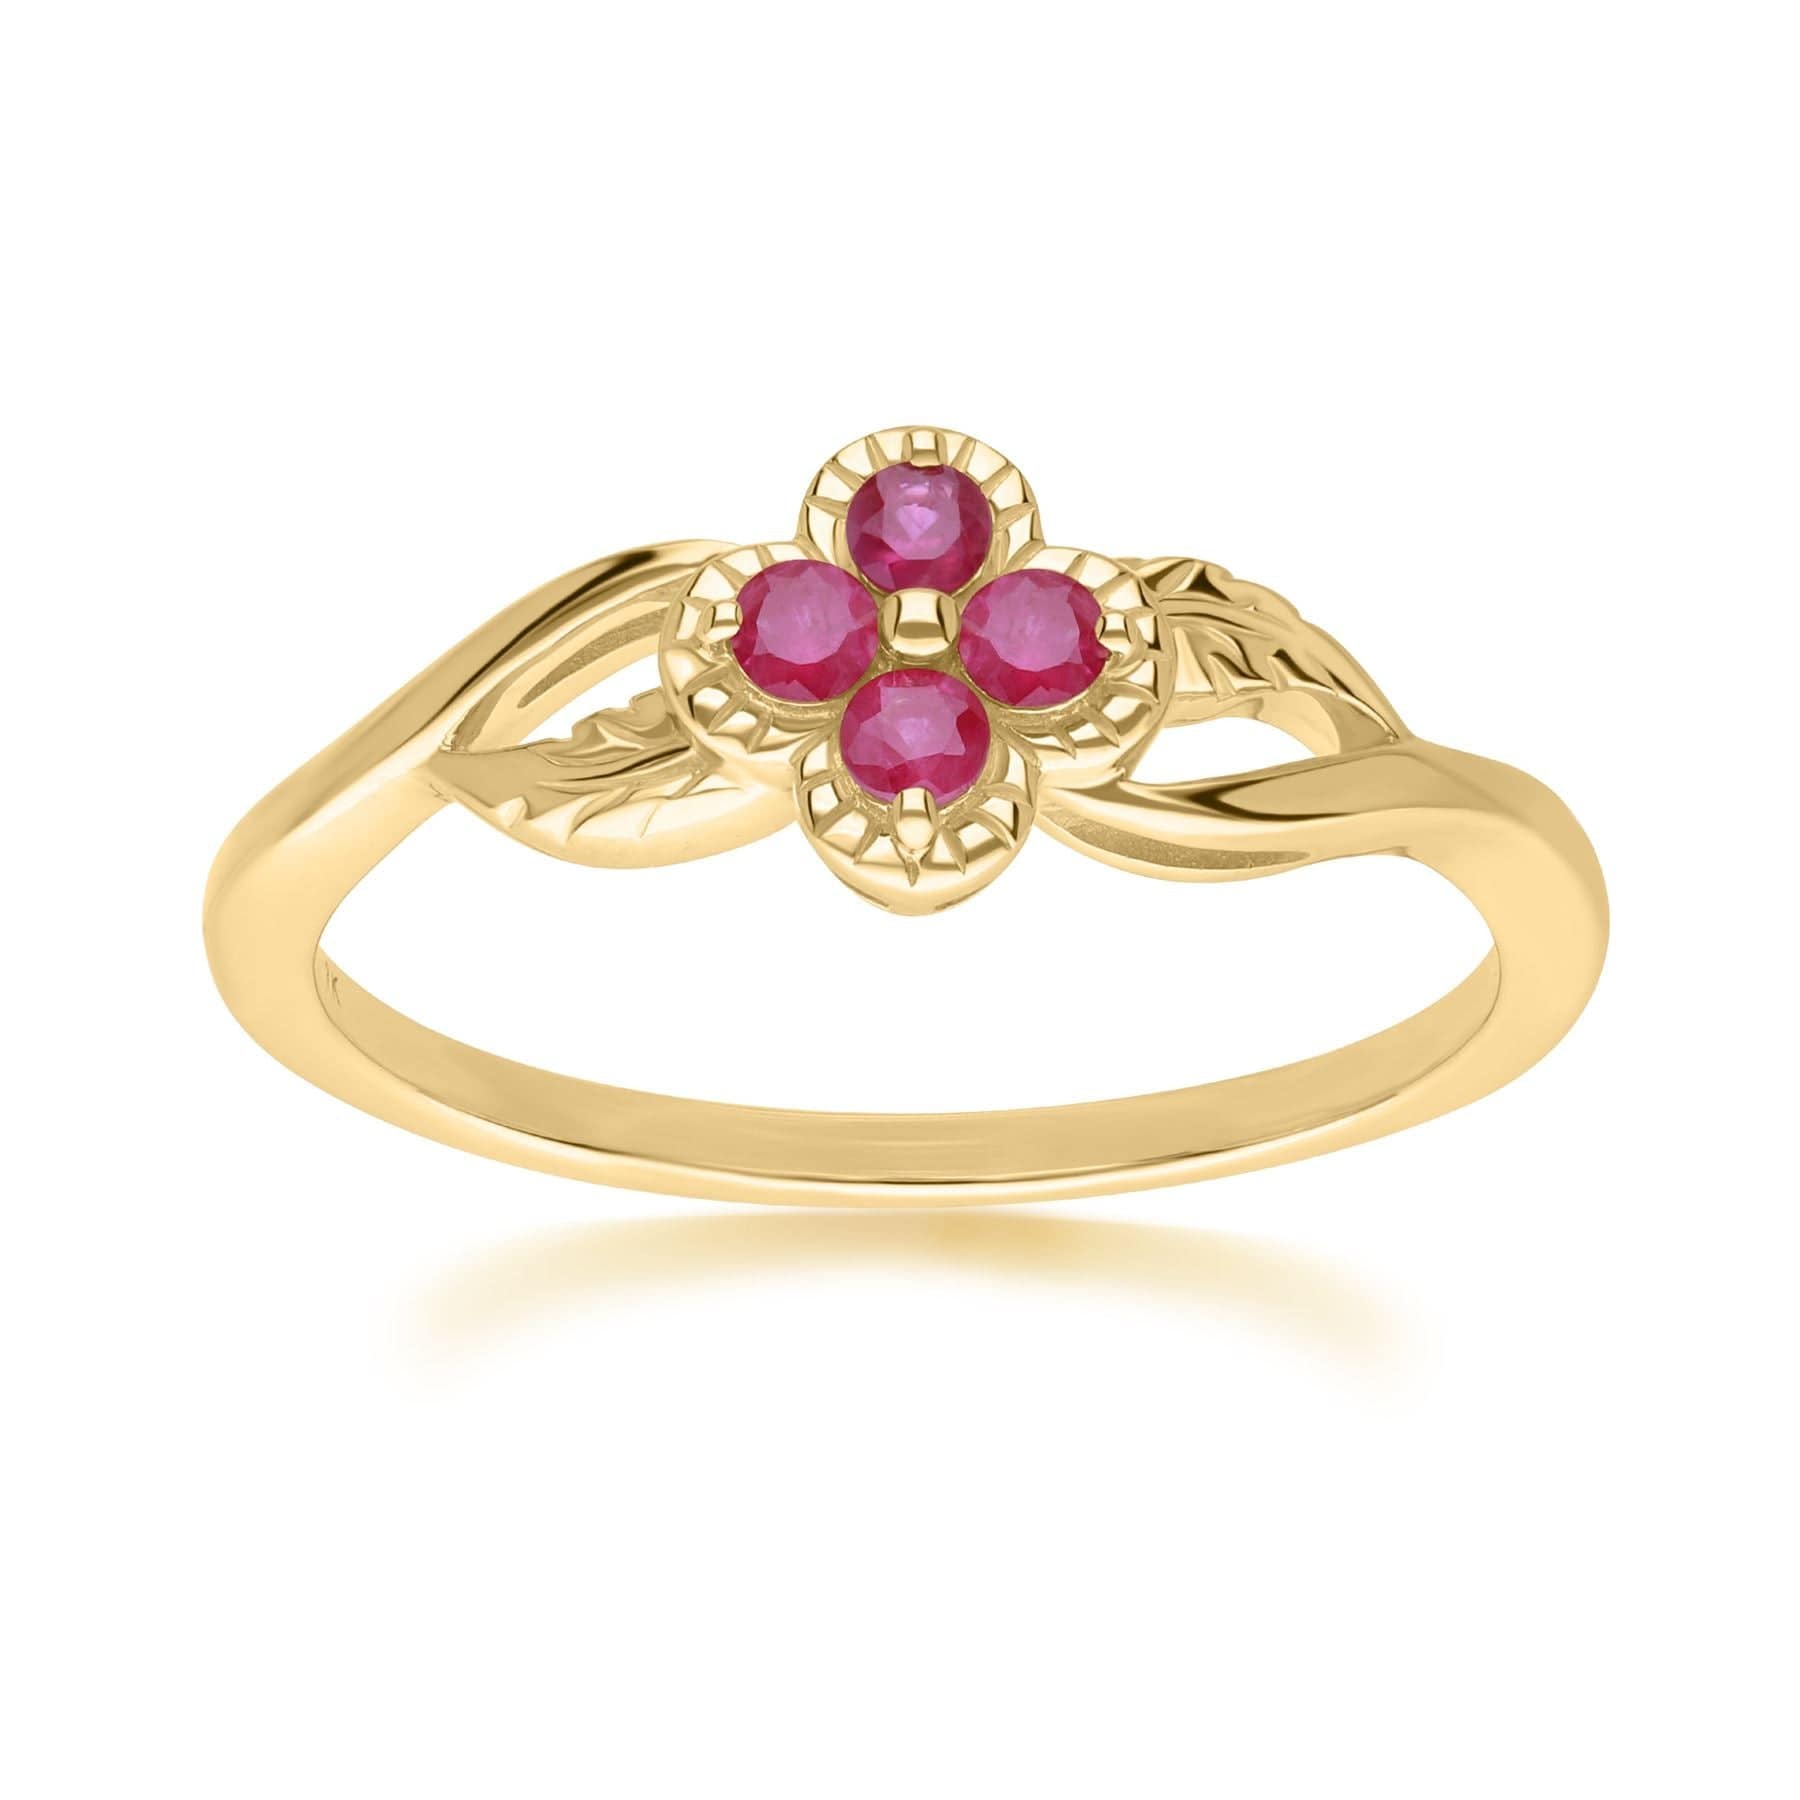 Floral Round Ruby Ring in 9ct Yellow Gold - Gemondo